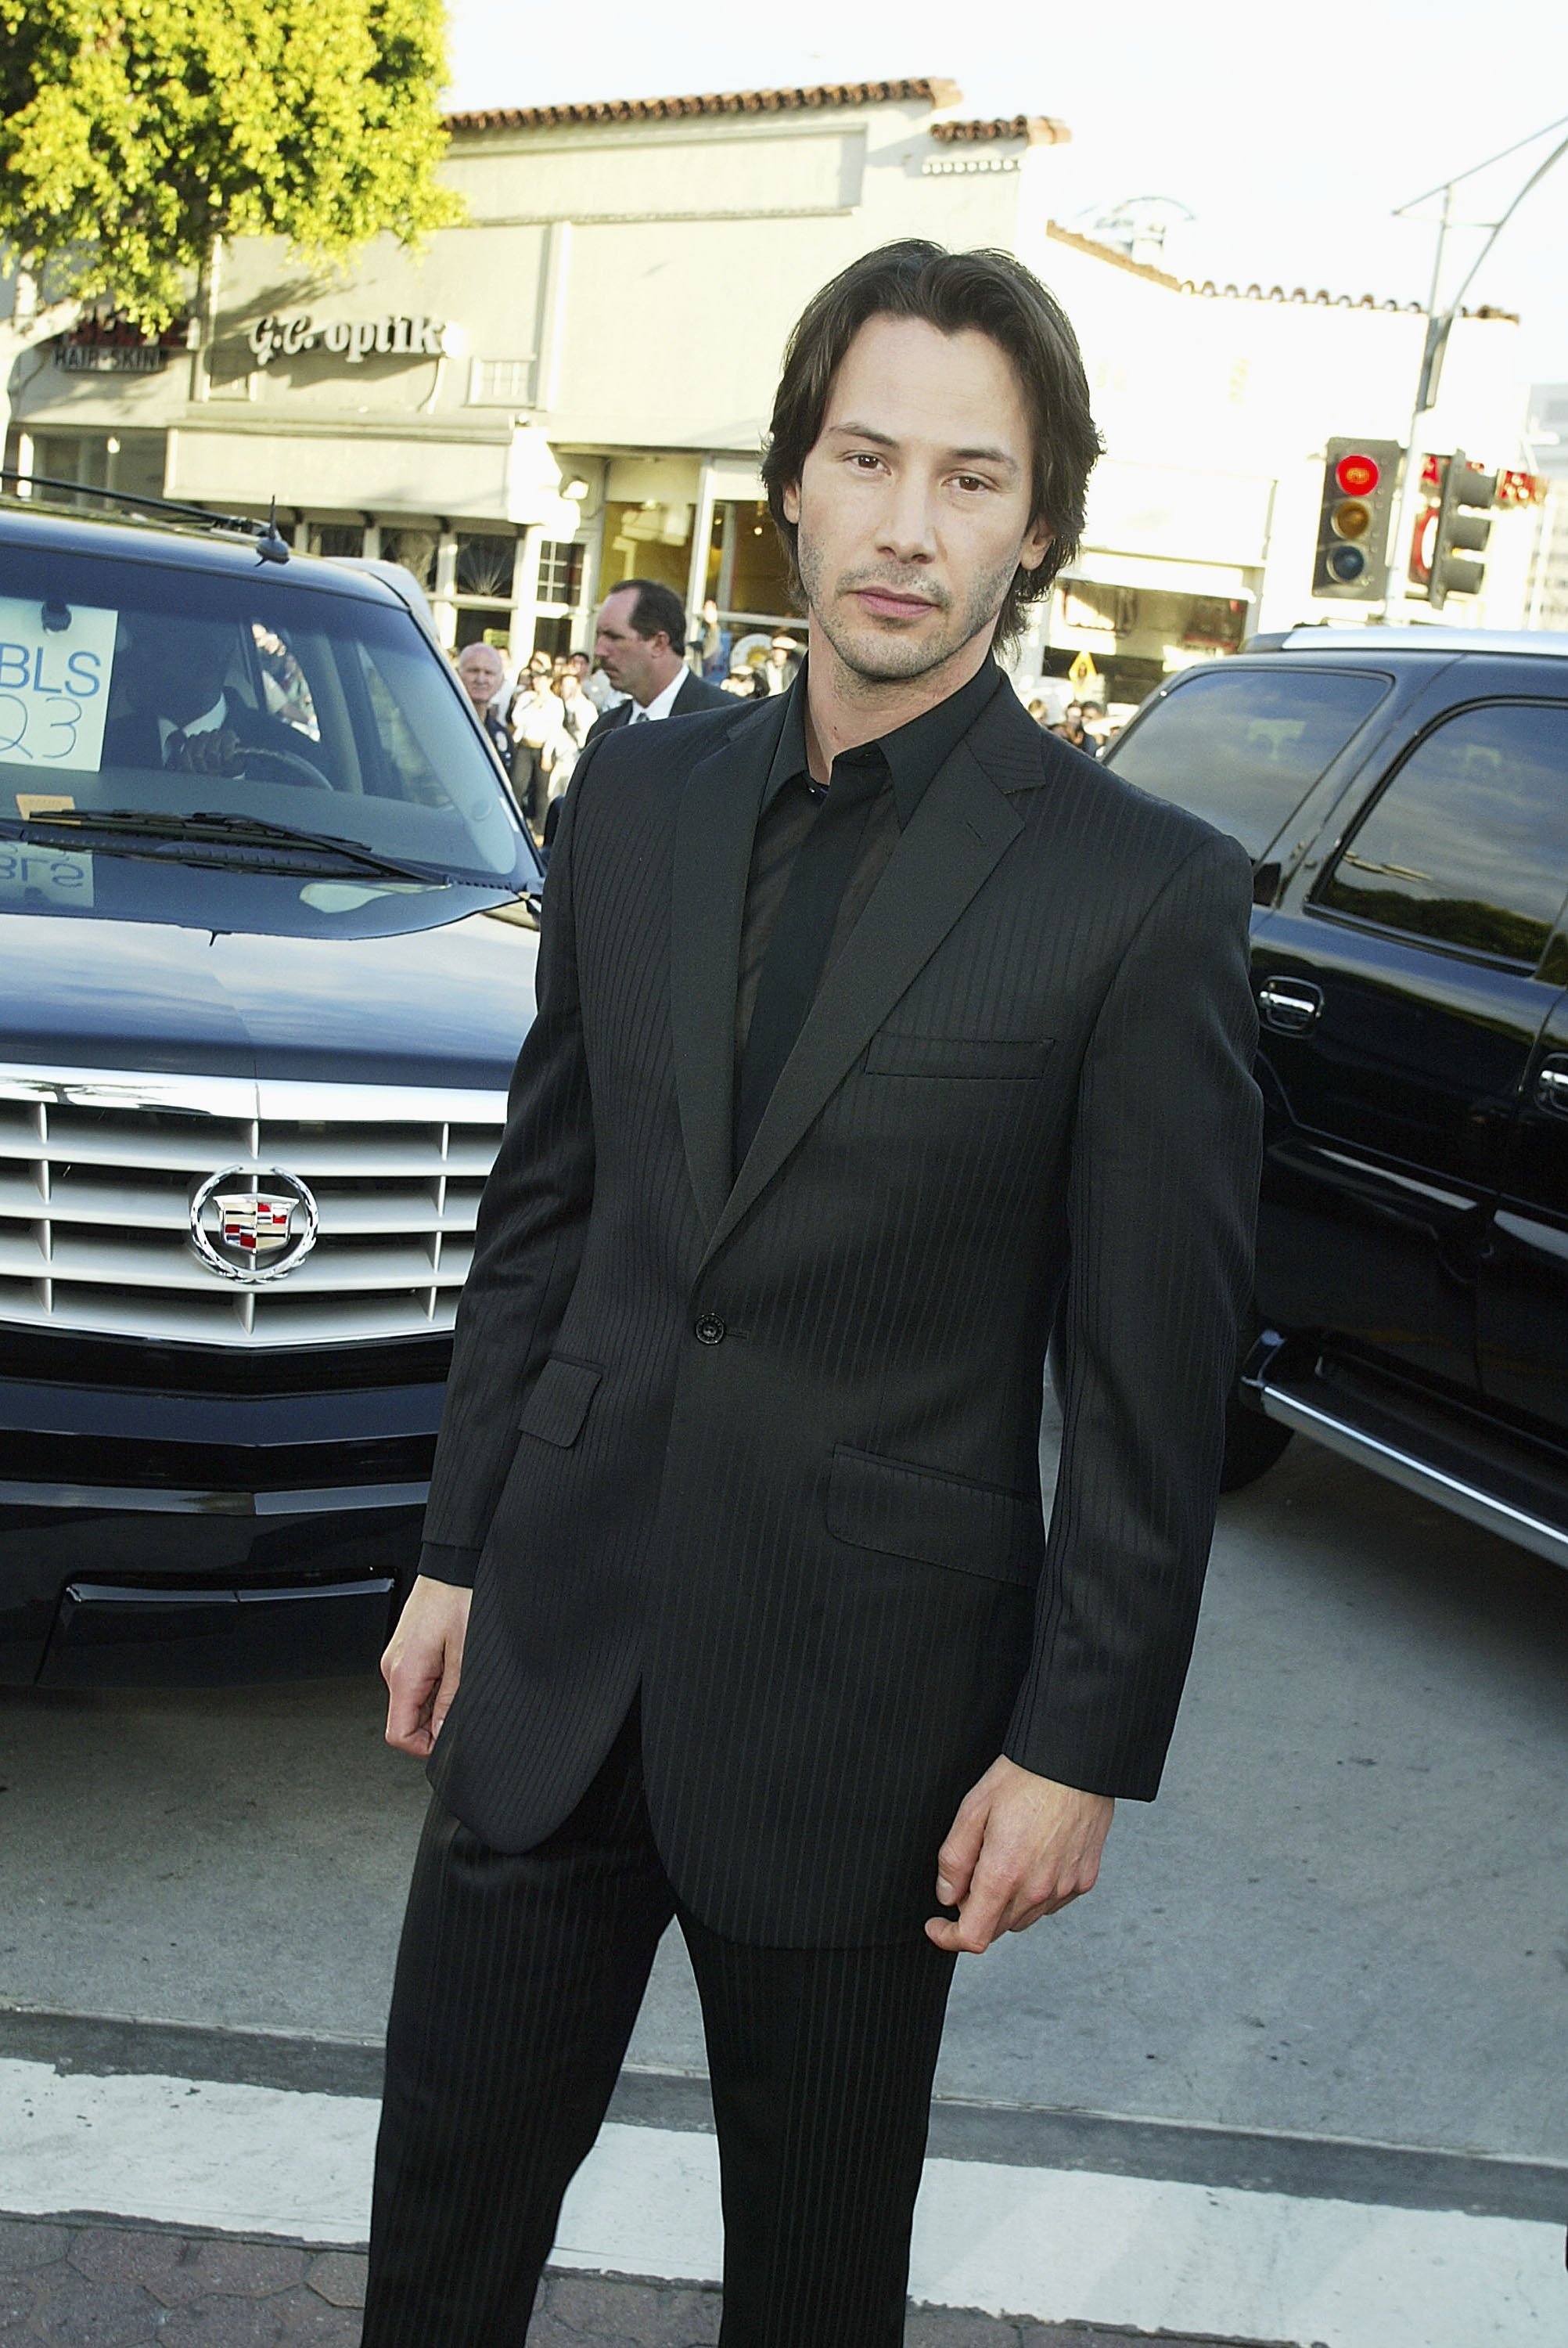 Actor Keanu Reeves arrives at "The Matrix Reloaded" premiere at the Village Theater on May 7, 2003 in Los Angeles, California| Source: Getty Images